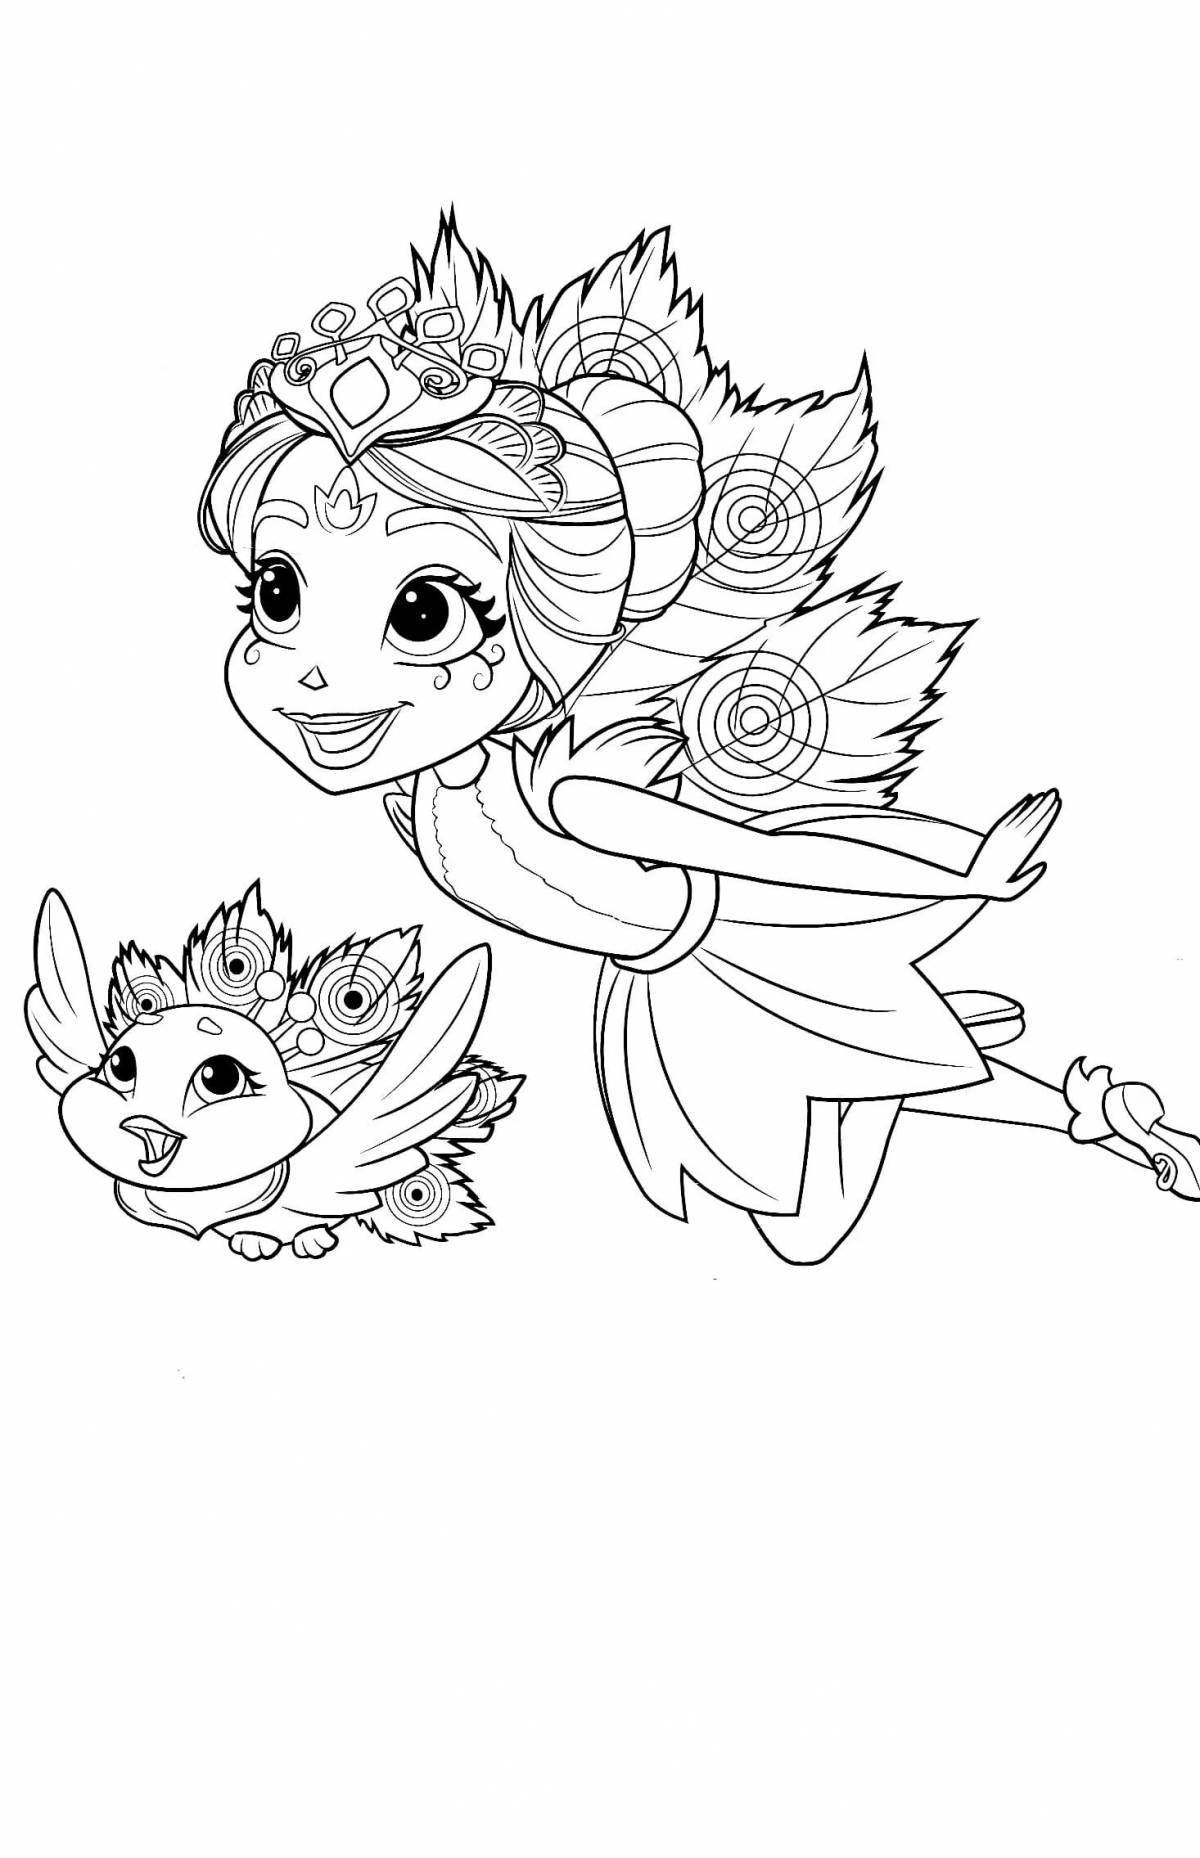 Lovely enchantimals coloring book